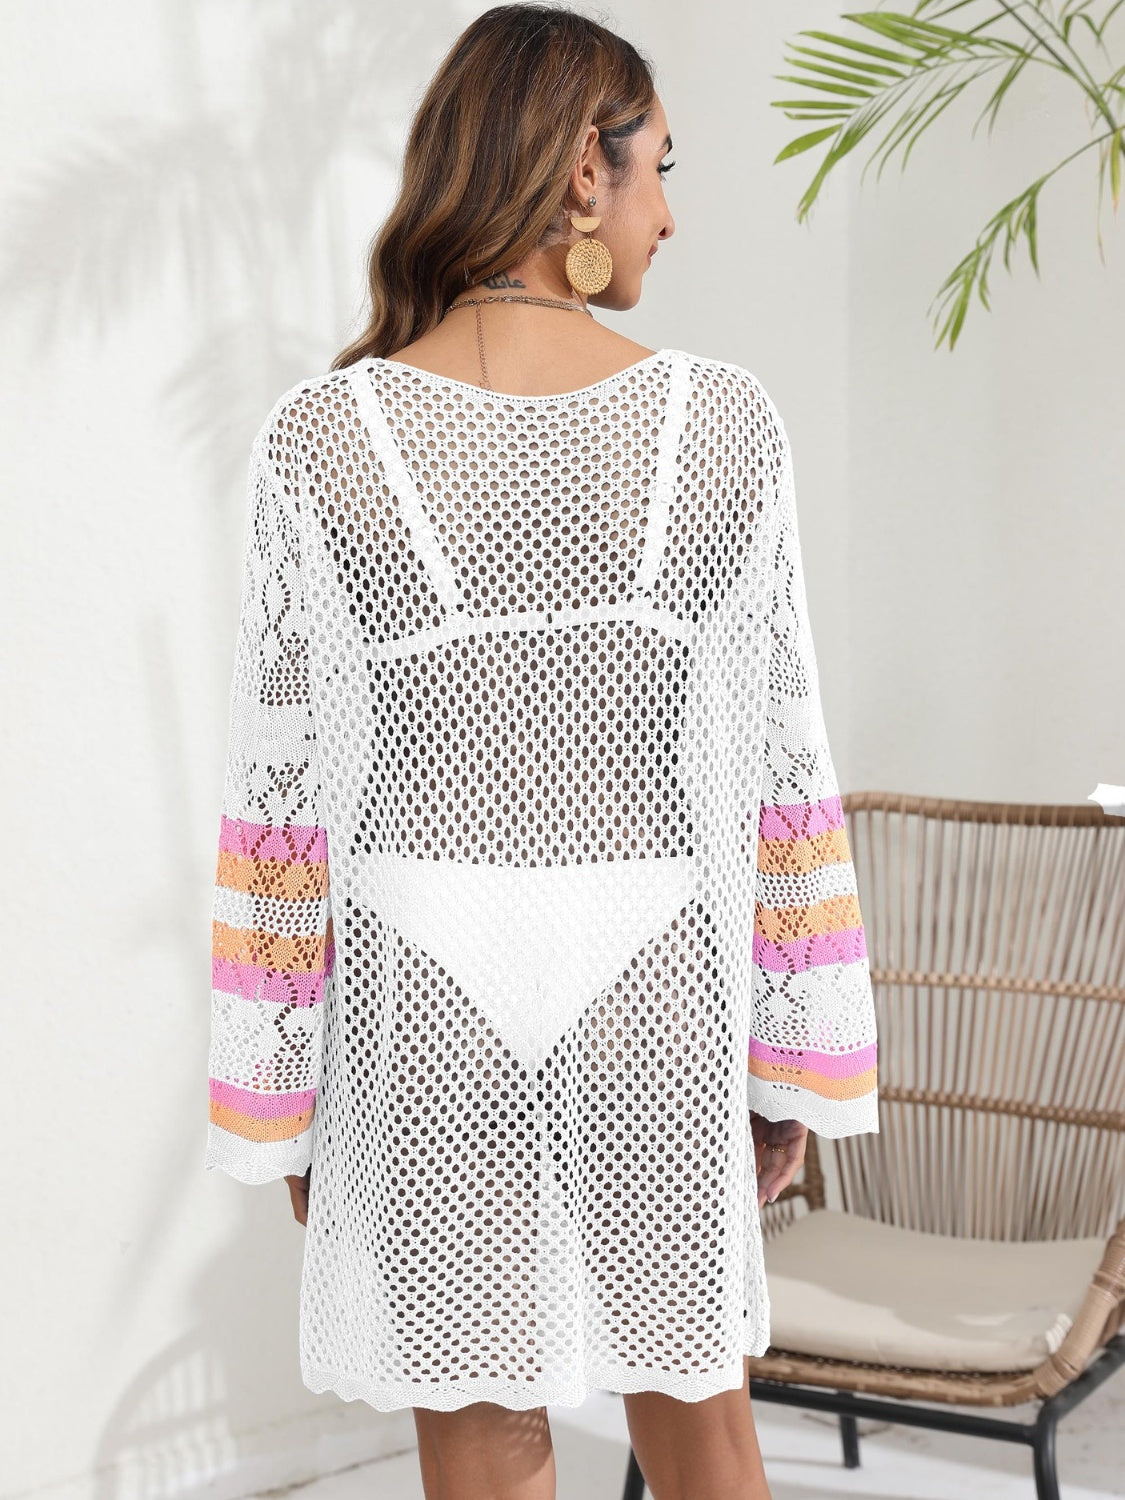 Sail With Me Openwork Contrast Long Sleeve Cover-Up